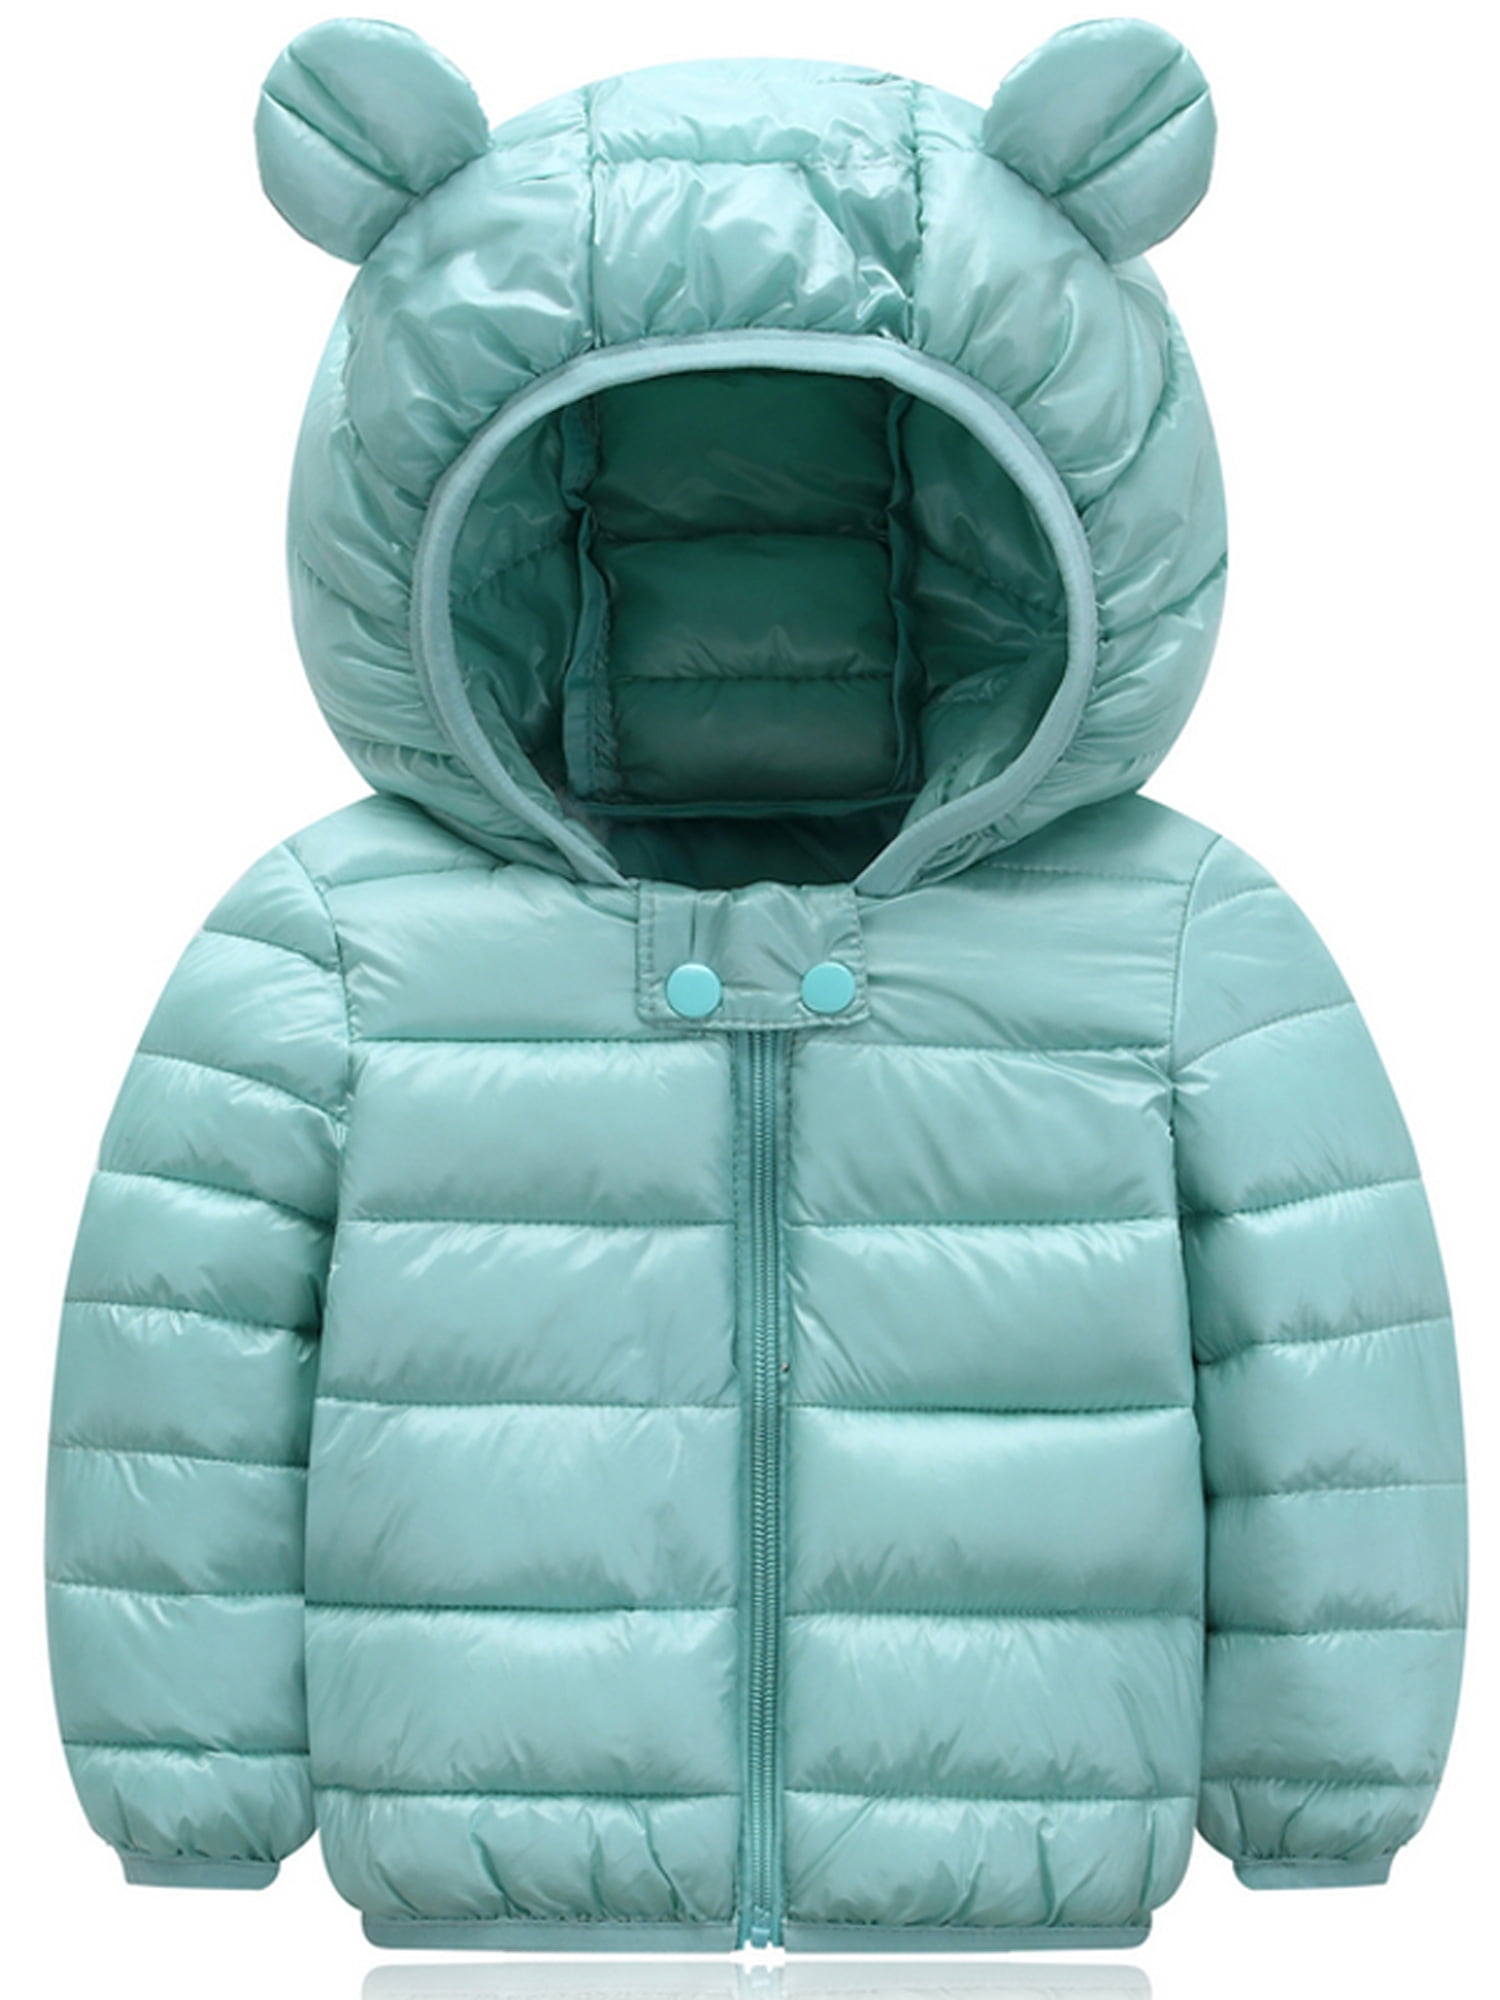 New Kids Boys Padded Quilted Puffer Coat Jacket Hoodie Hooded Parka Warm Winter 